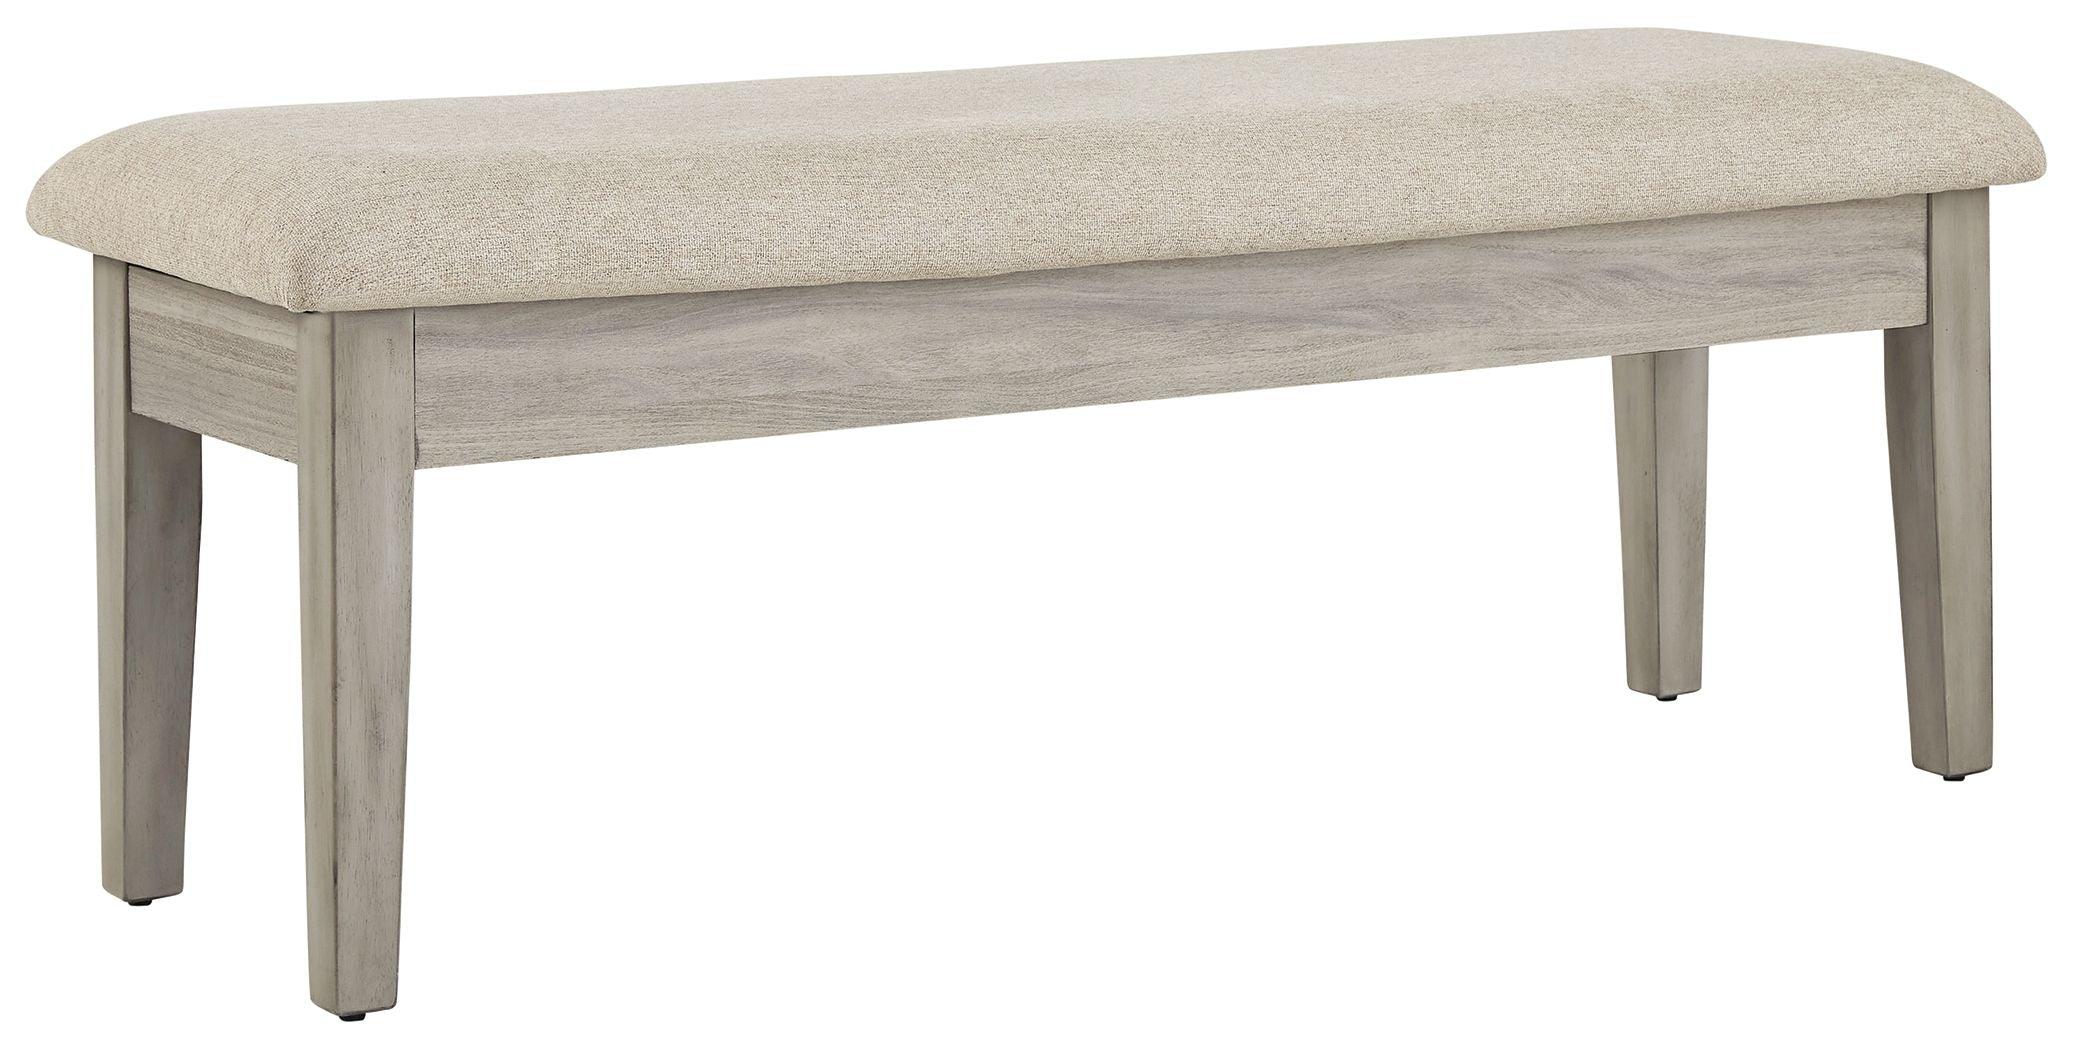 Signature Design by Ashley® - Parellen - Beige / Gray - Upholstered Storage Bench - 5th Avenue Furniture